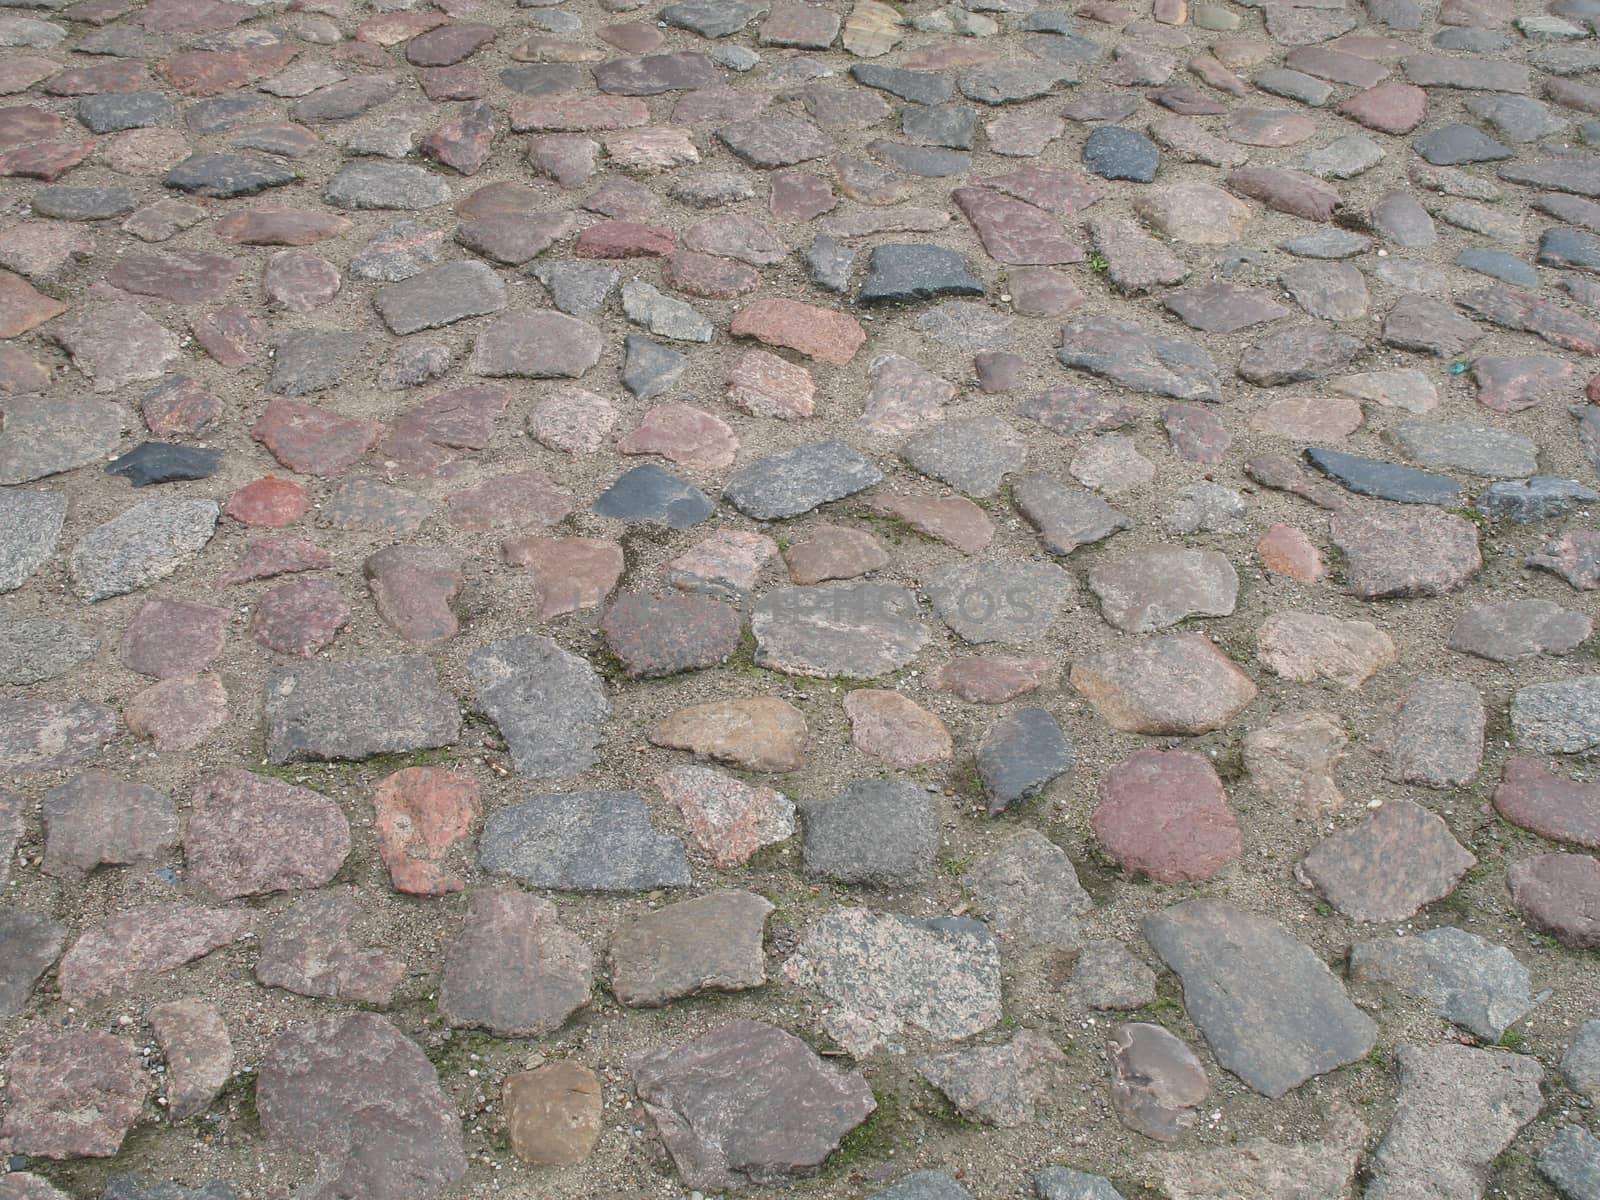 A road that is paved with cobblestones.